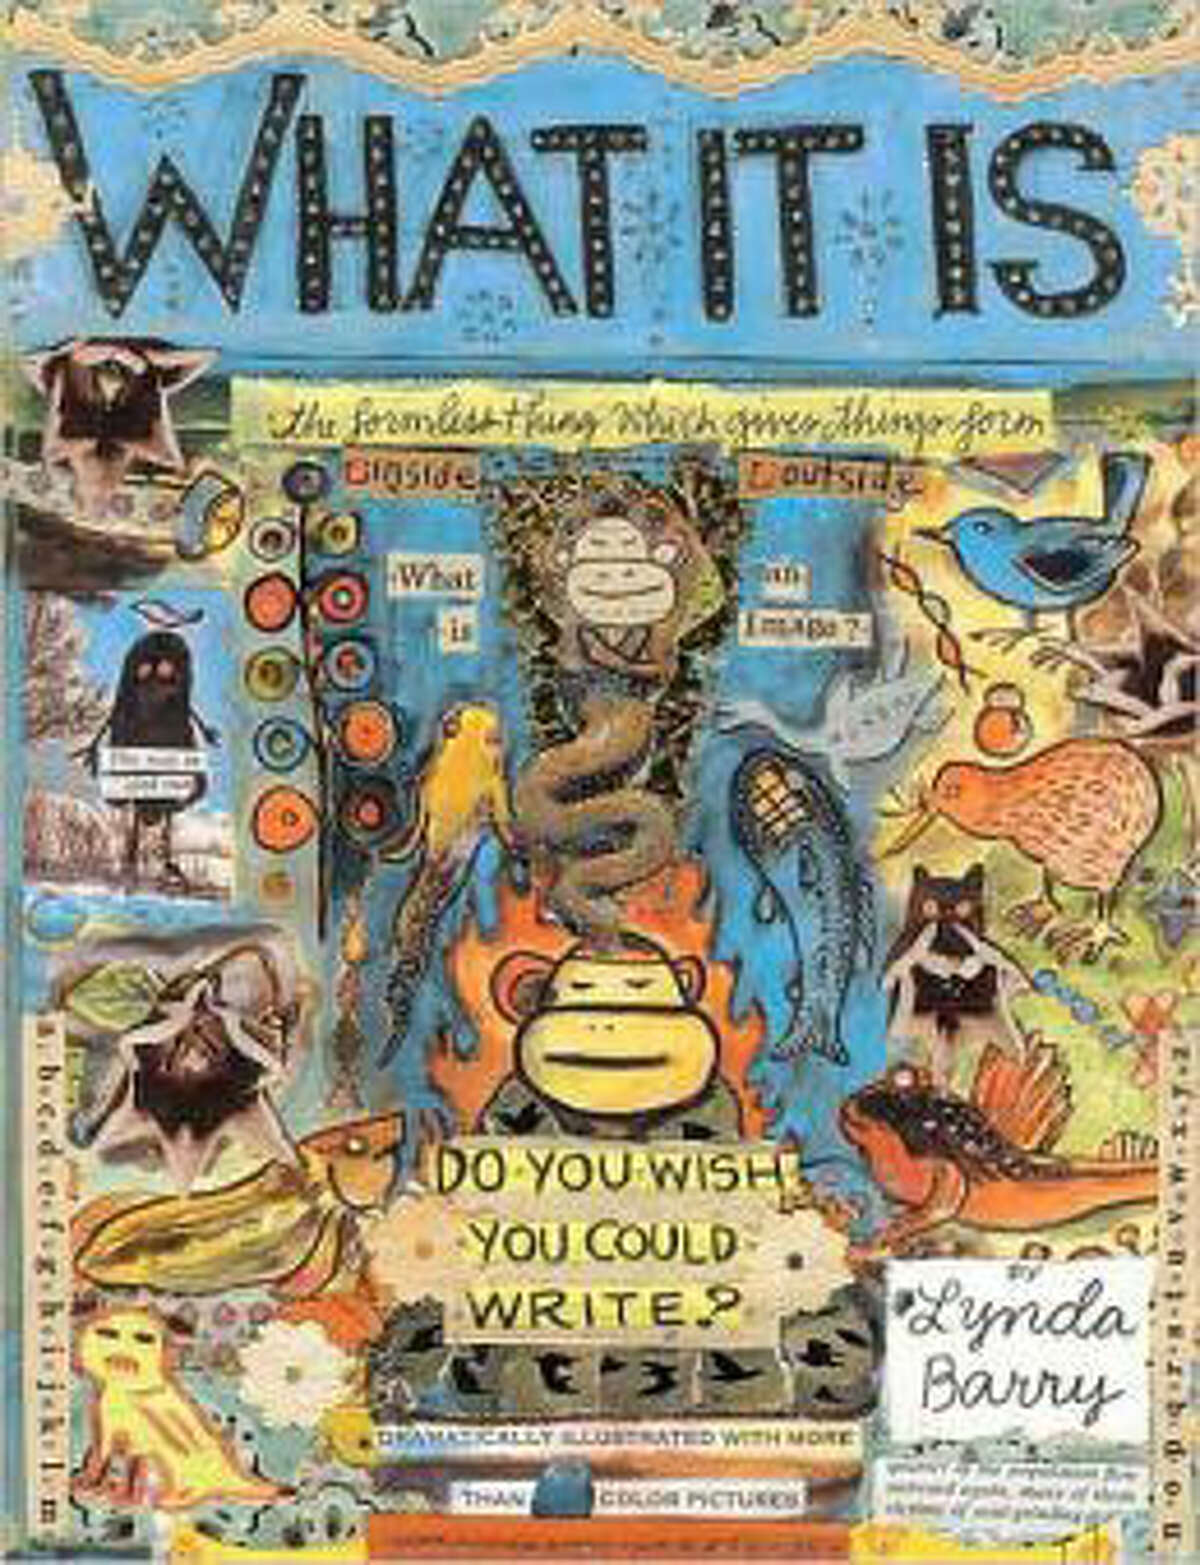 Lynda Barry's 2008 book “What It Is” is a graphic novel, part memoir, part collage and part workbook.